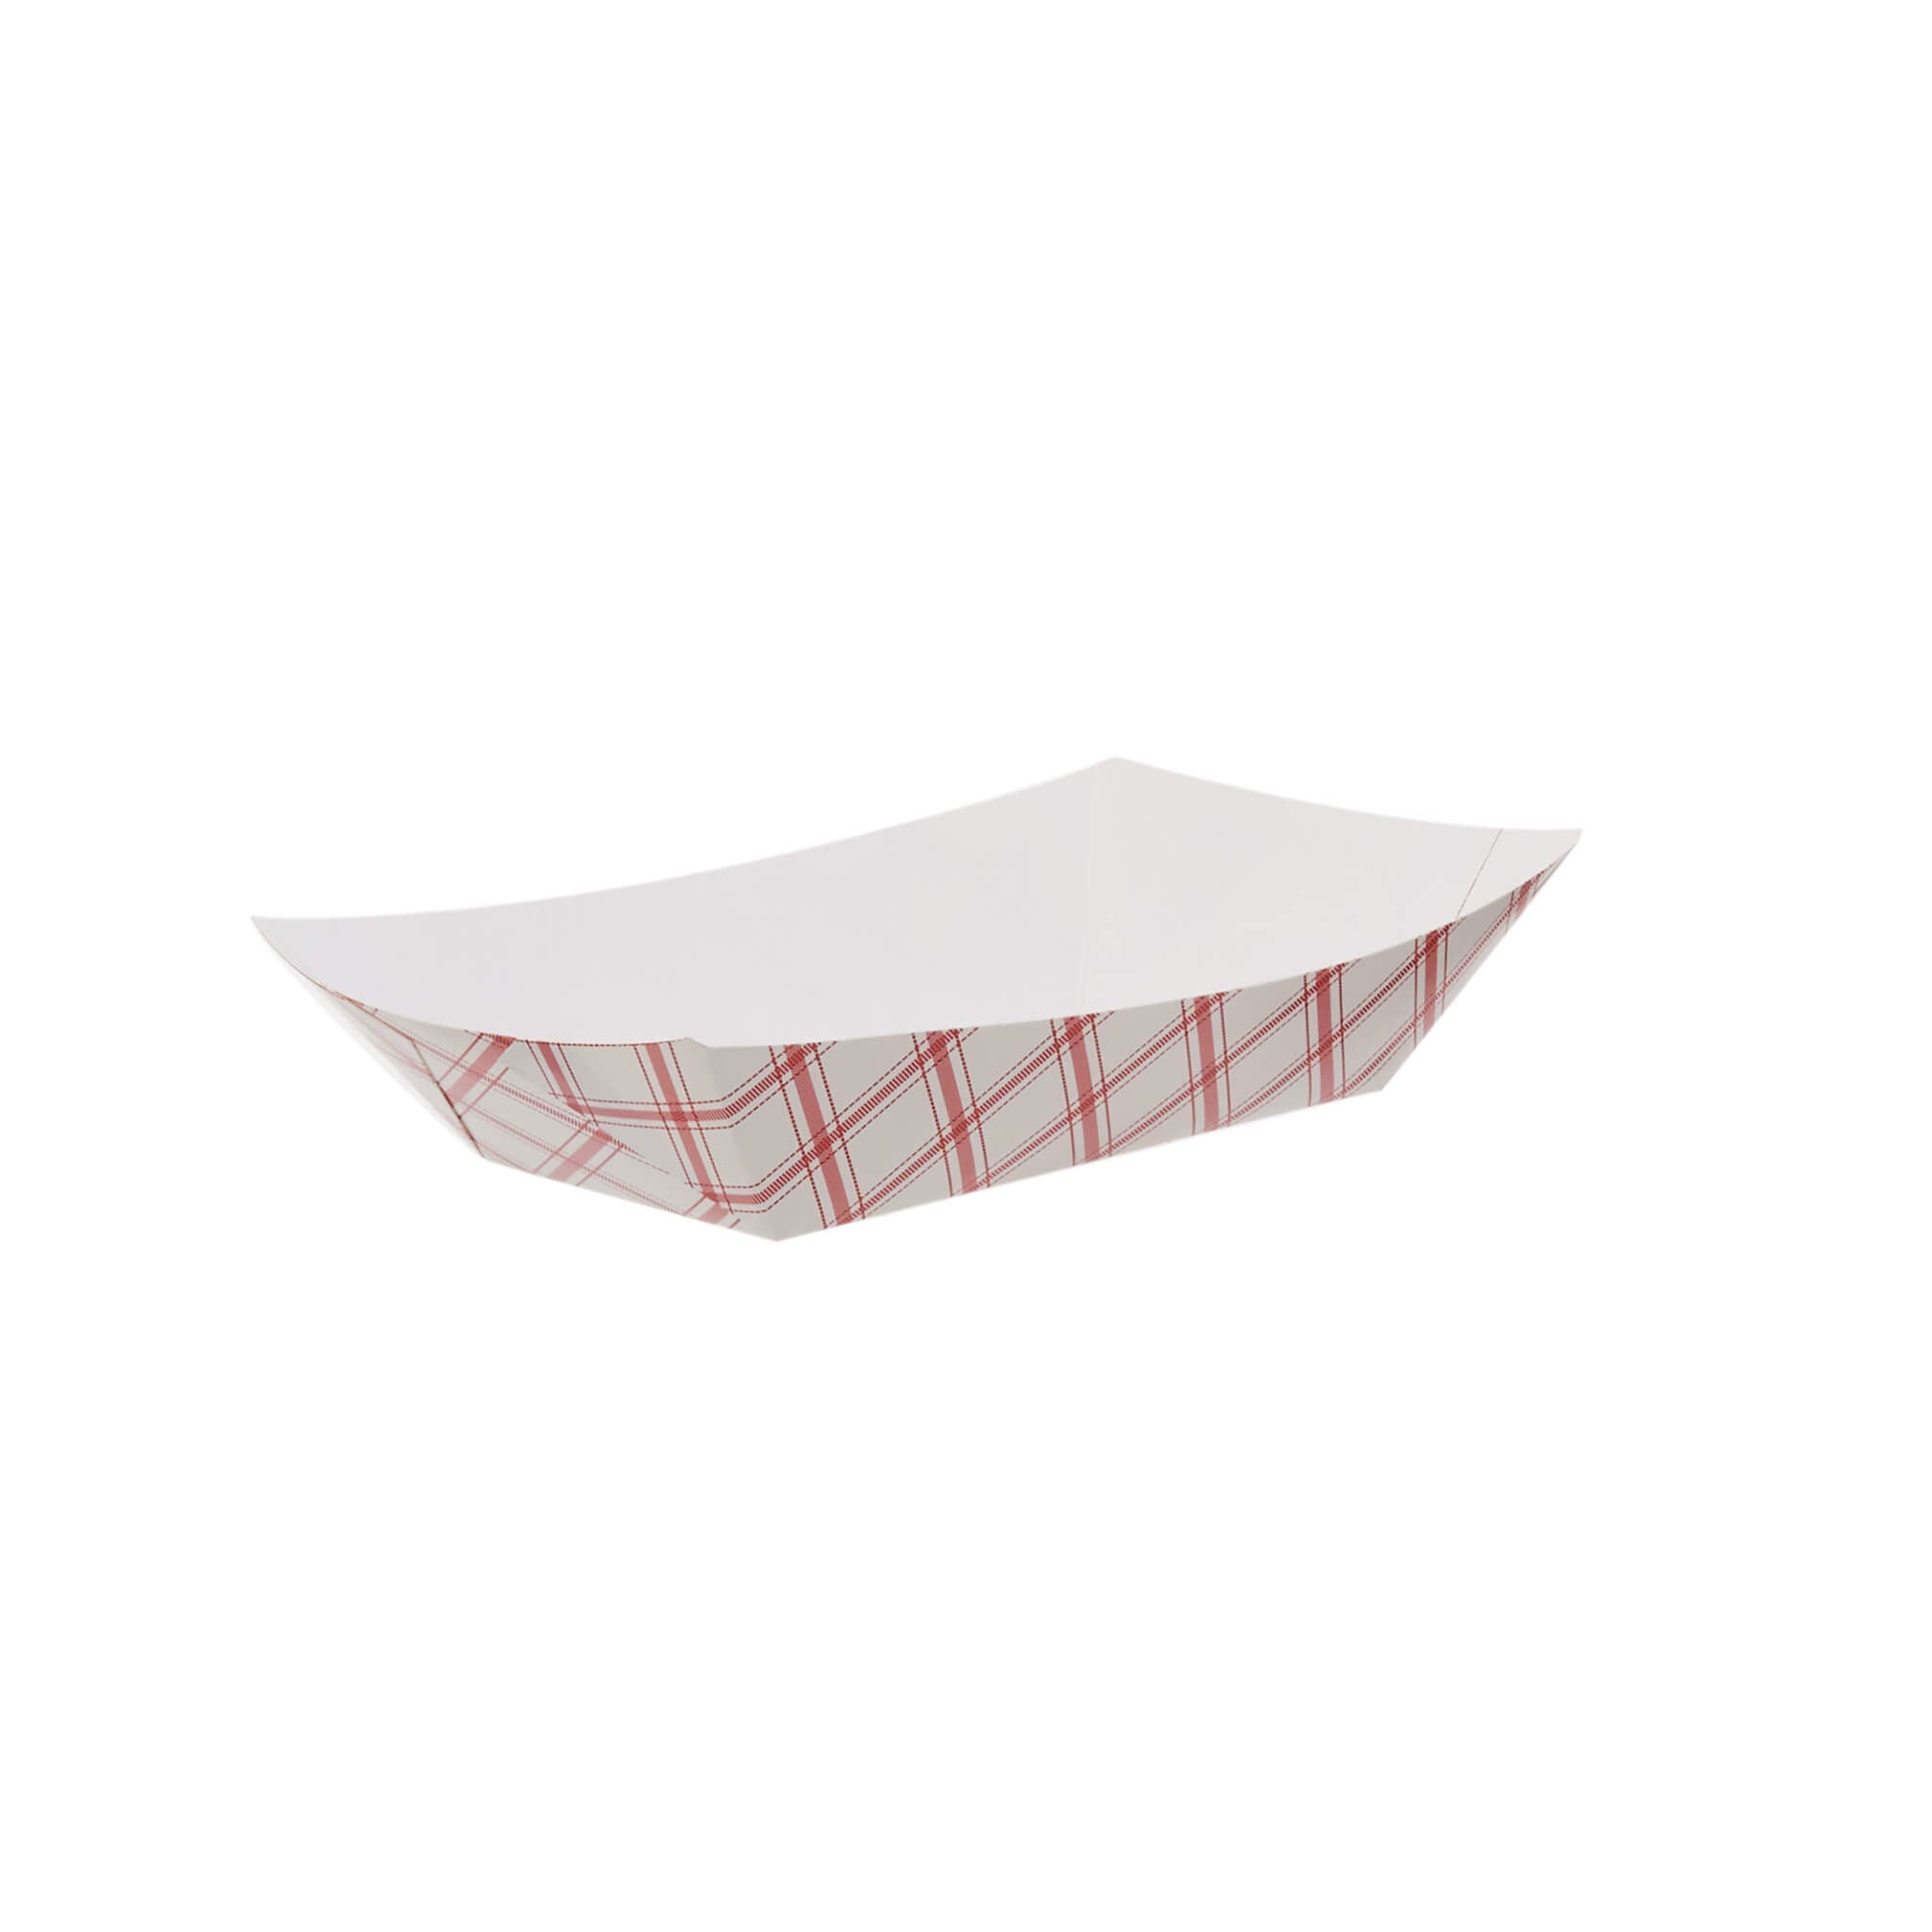 Red and White Boat Tray 3 lb #300 - Hotpack Global